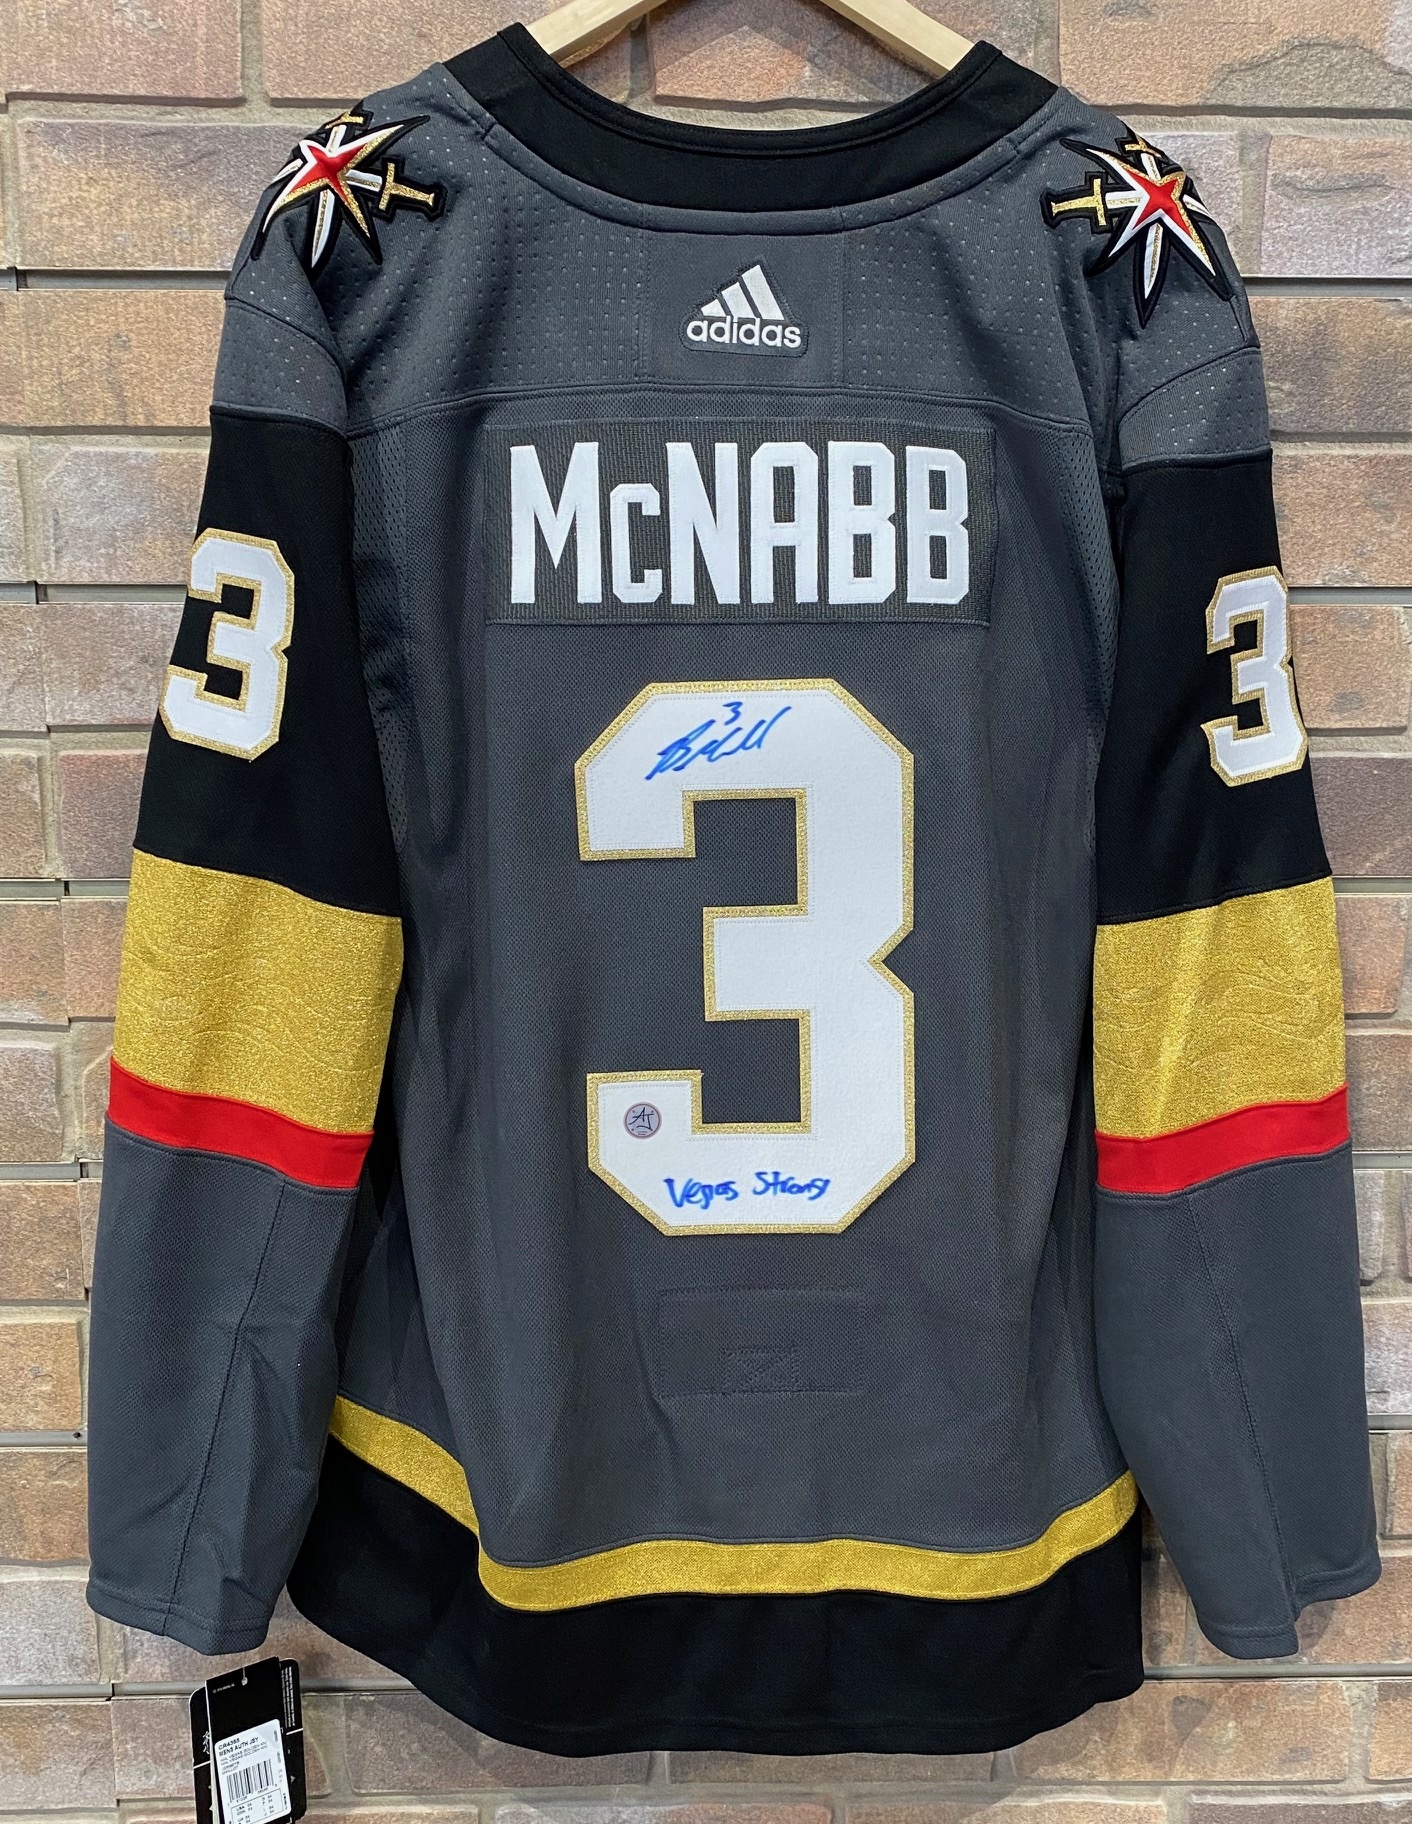 Brayden McNabb Las Vegas Golden Knights Signed Adidas Jersey with Vegas Stong Note